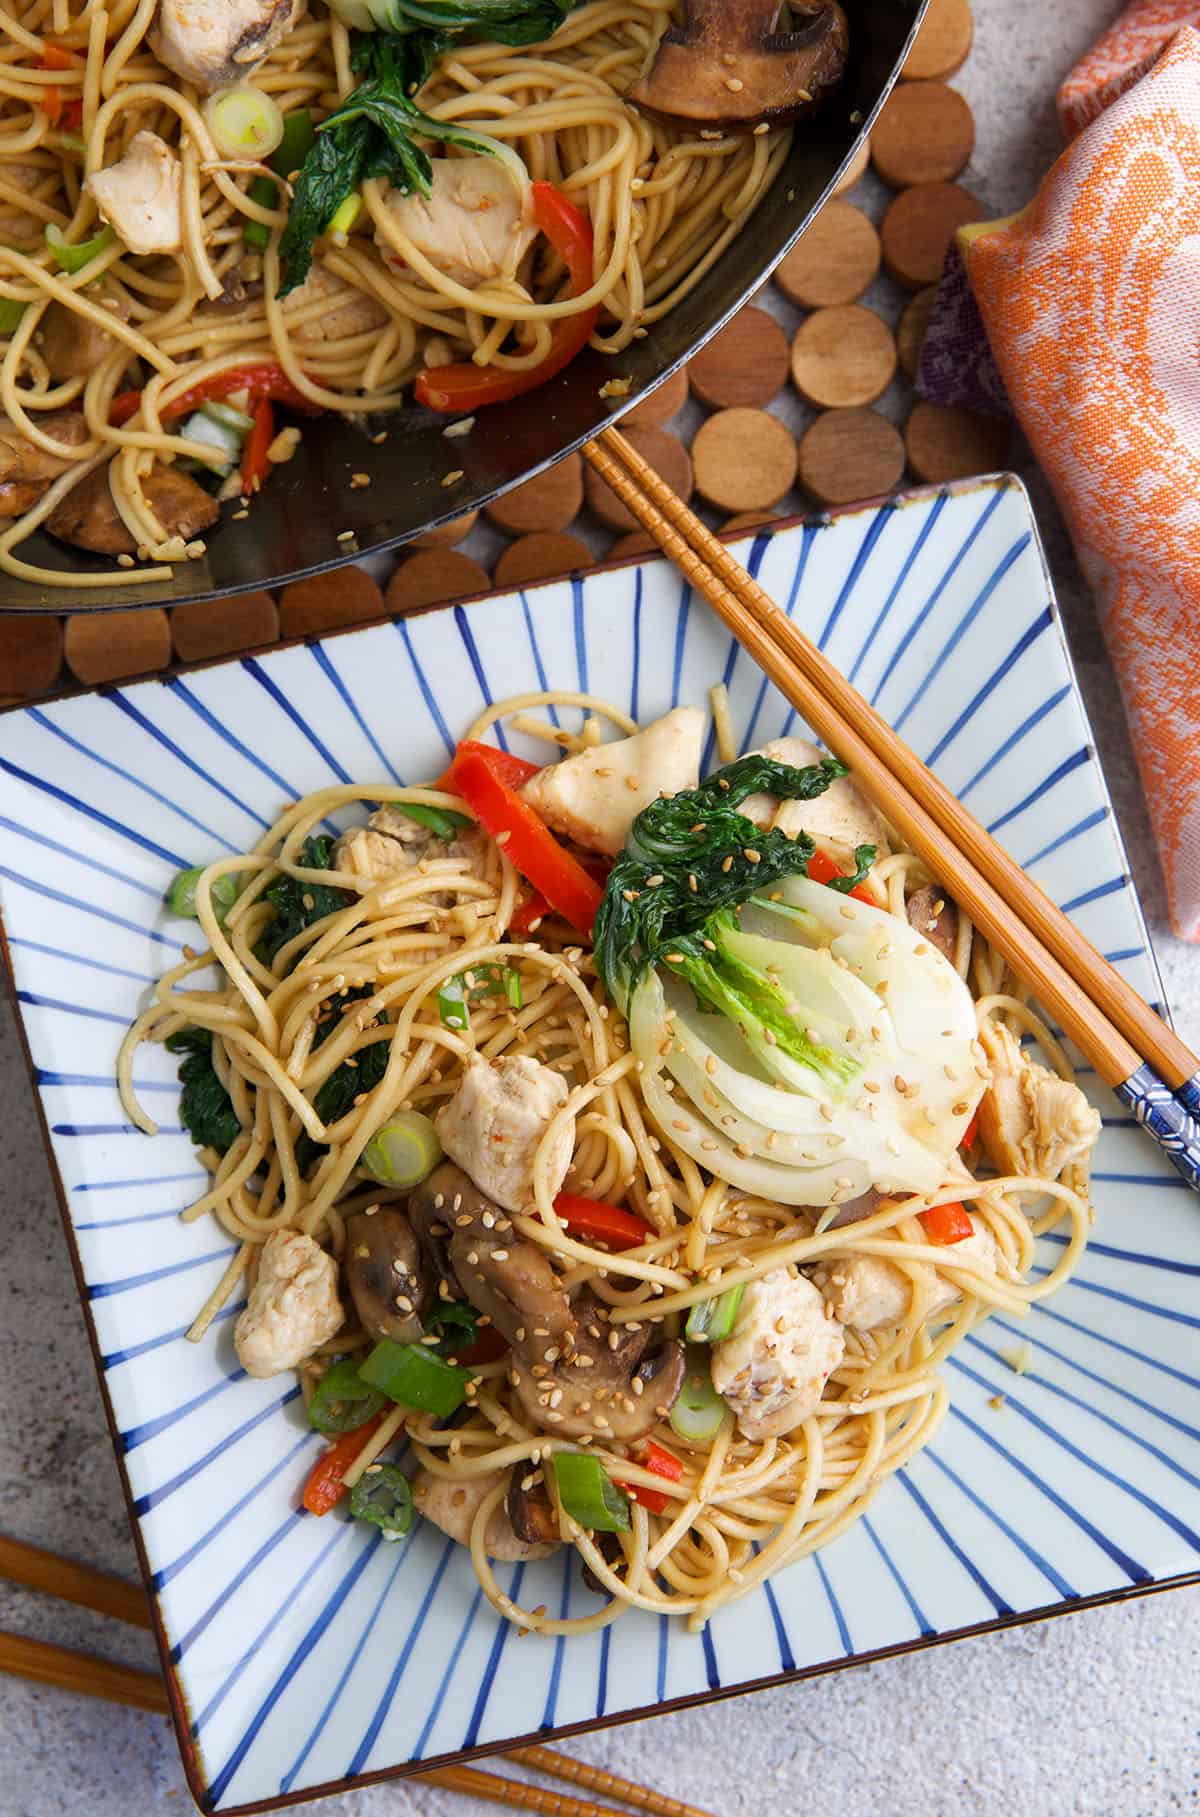 A pair of chopsticks are placed on a plate next to a serving of chow mein. 